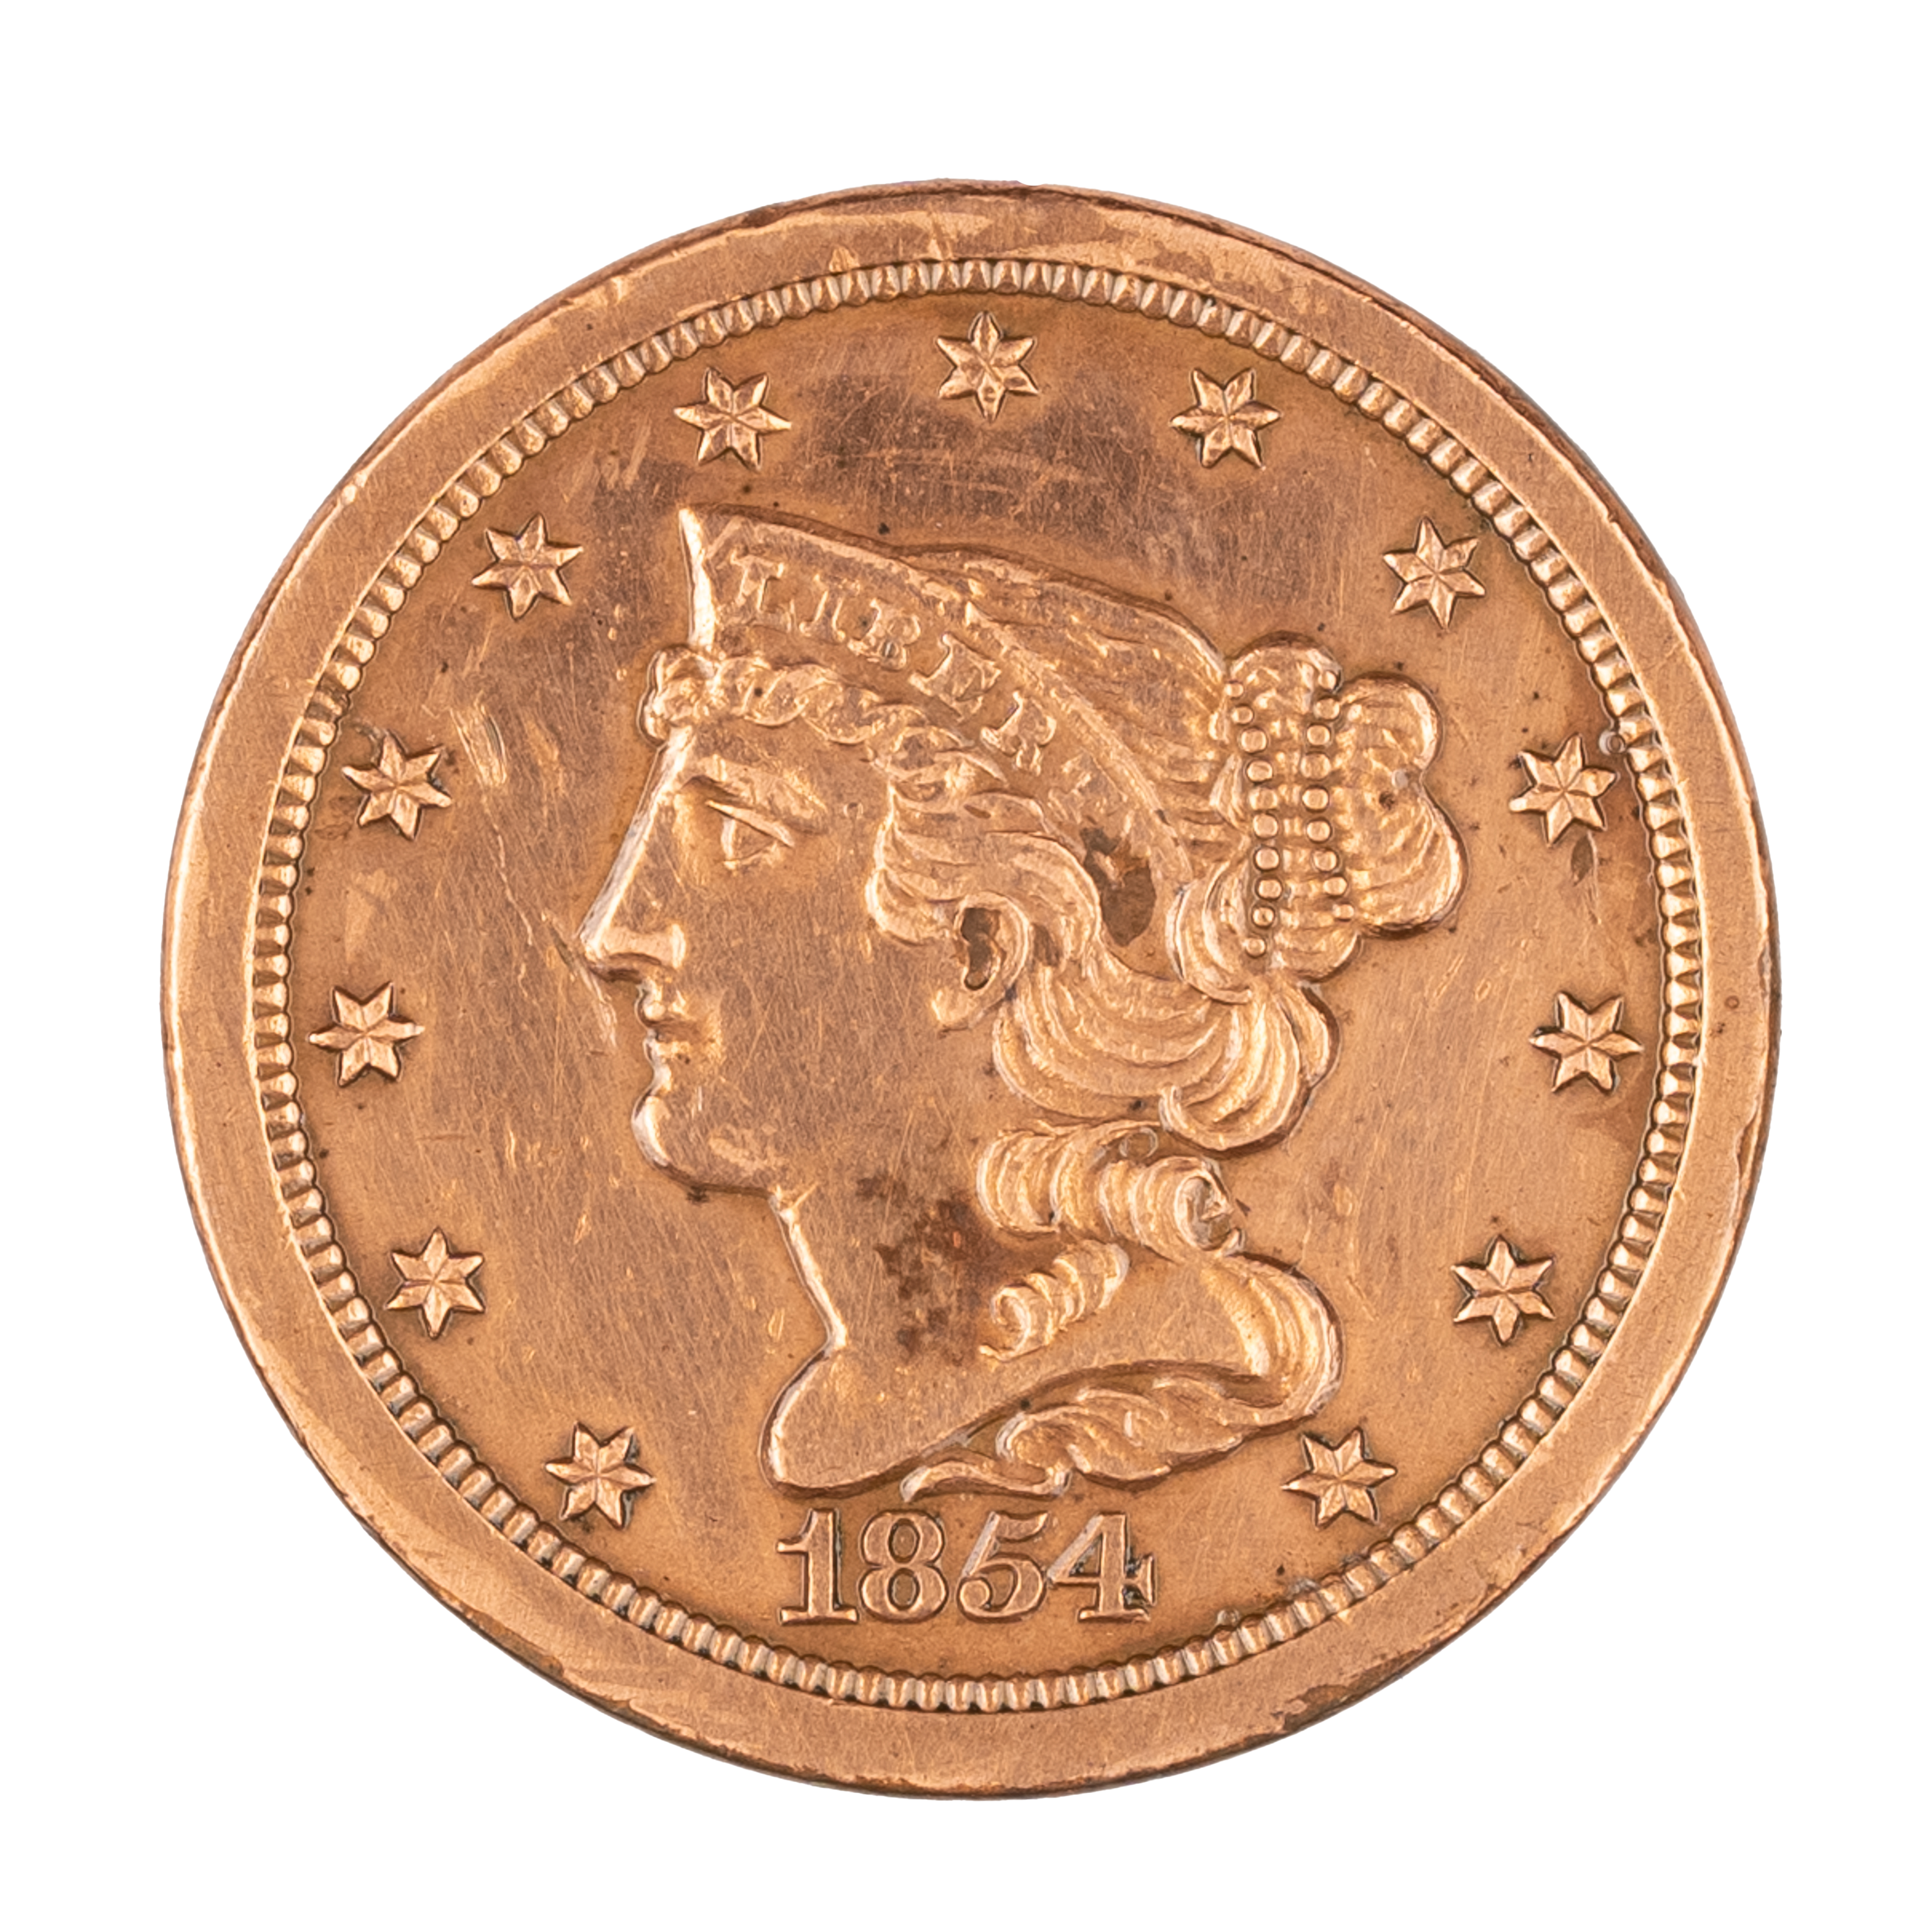 https://museum.stlouisfed.org/-/media/project/economymuseum/economy-museum/currency/braidedhair-front-hi-res.png?sc_lang=en&hash=65906ECFF01F8C7434FB180BB3321CA4